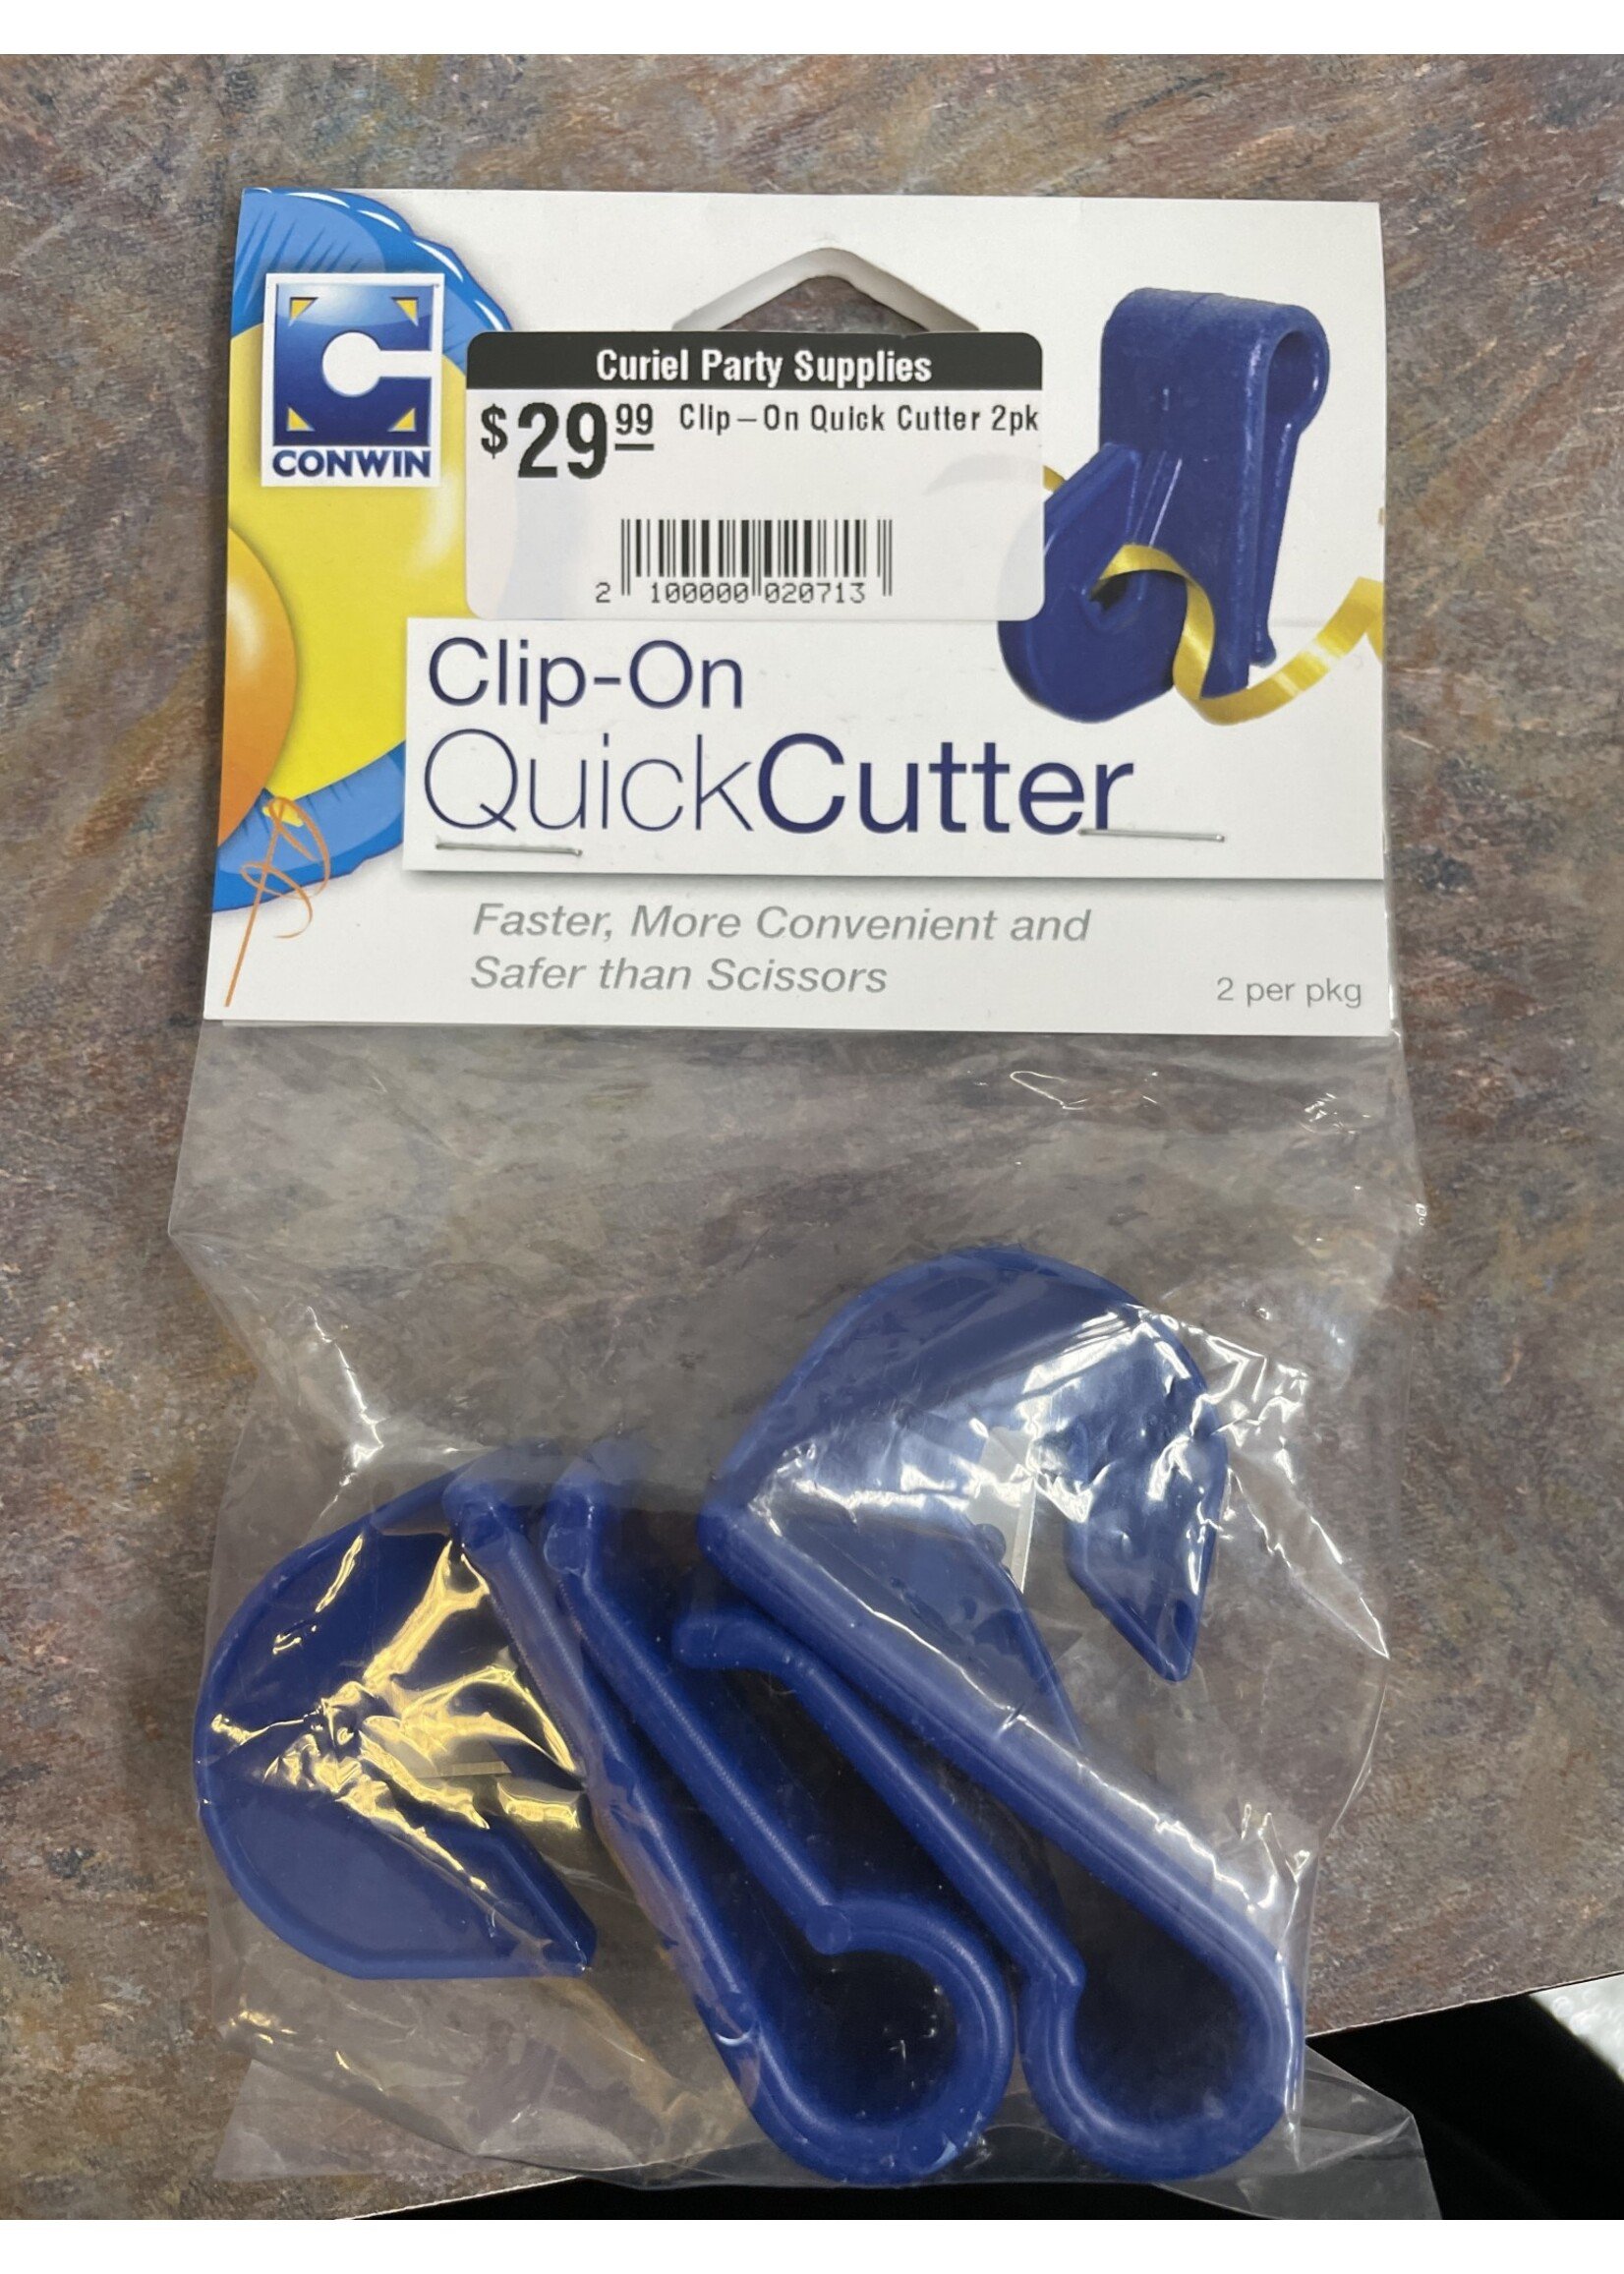 Clip-On Quick Cutter 2pk